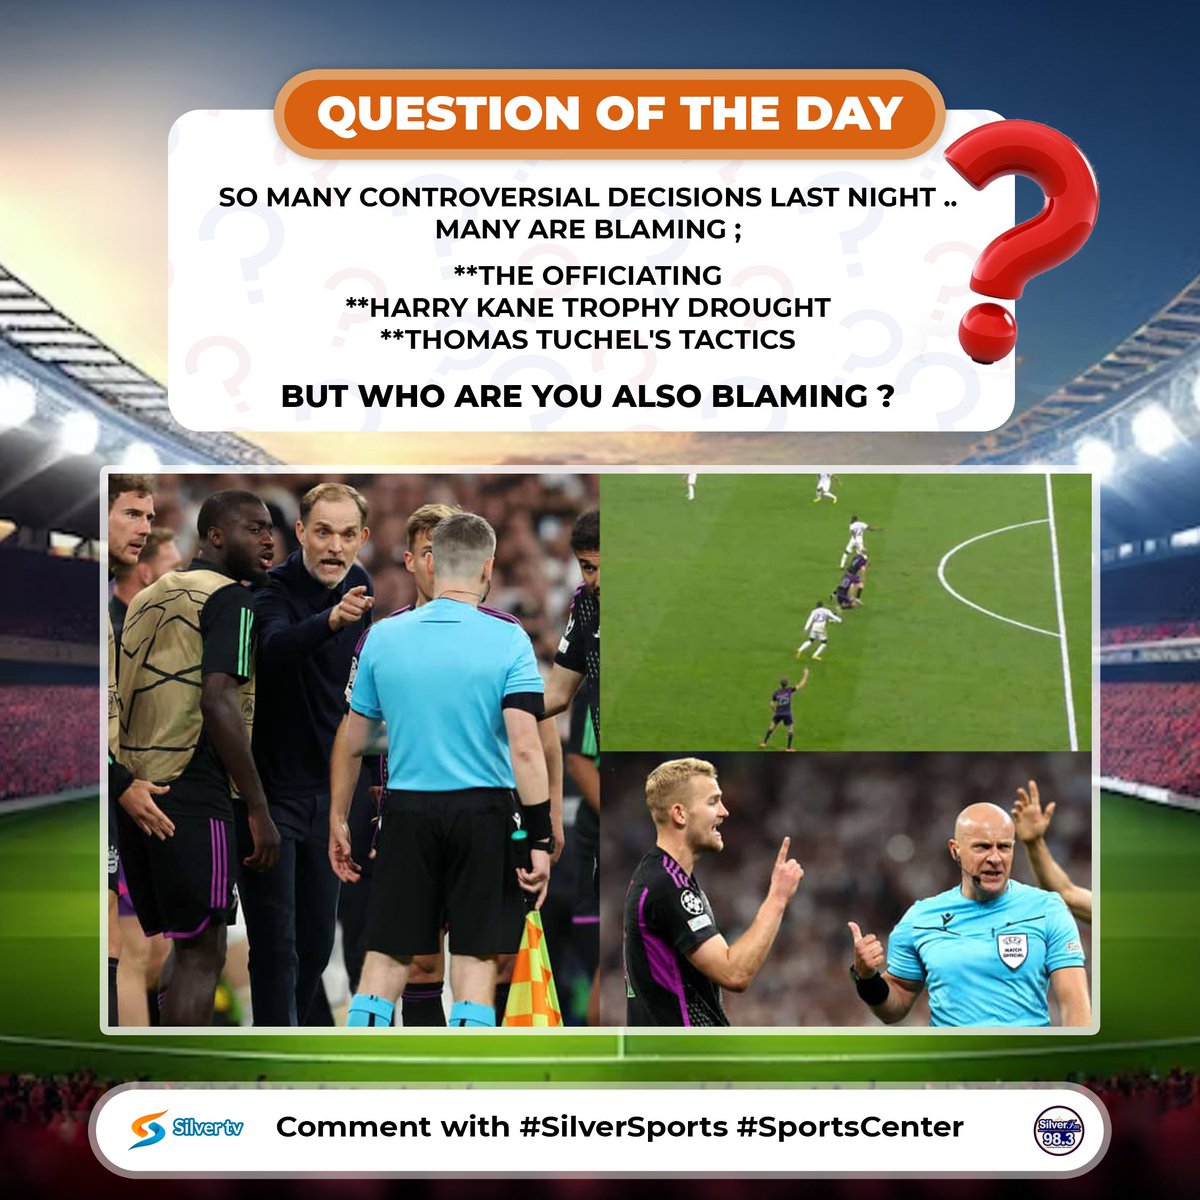 So many controversial decisions last night..many are blaming ; **The Officiating **Harry Kane's. Trophy drought ** Thomas Tuchel's tactics Who are you also blaming ? Let's hear you .......😆 #SportsCenter